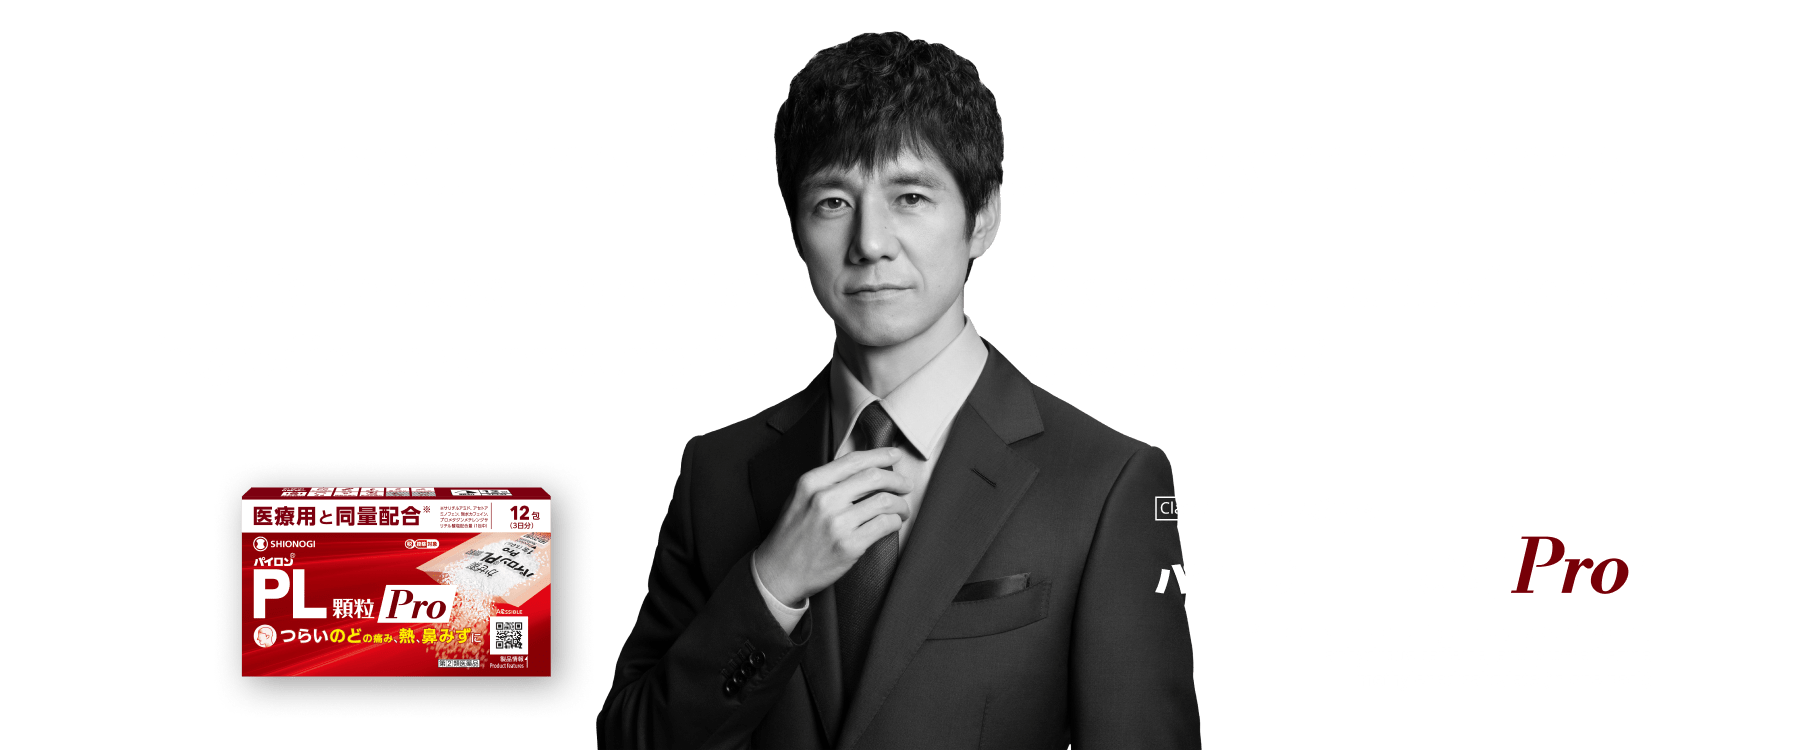 Use red Pro for cold symptoms. This is because Pro contains the same amount of active ingredients as prescription-grade drugs. * The amounts of salicylamide, acetaminophen, anhydrous caffeine, and promethazine methylenedisalicylate (in one pack)